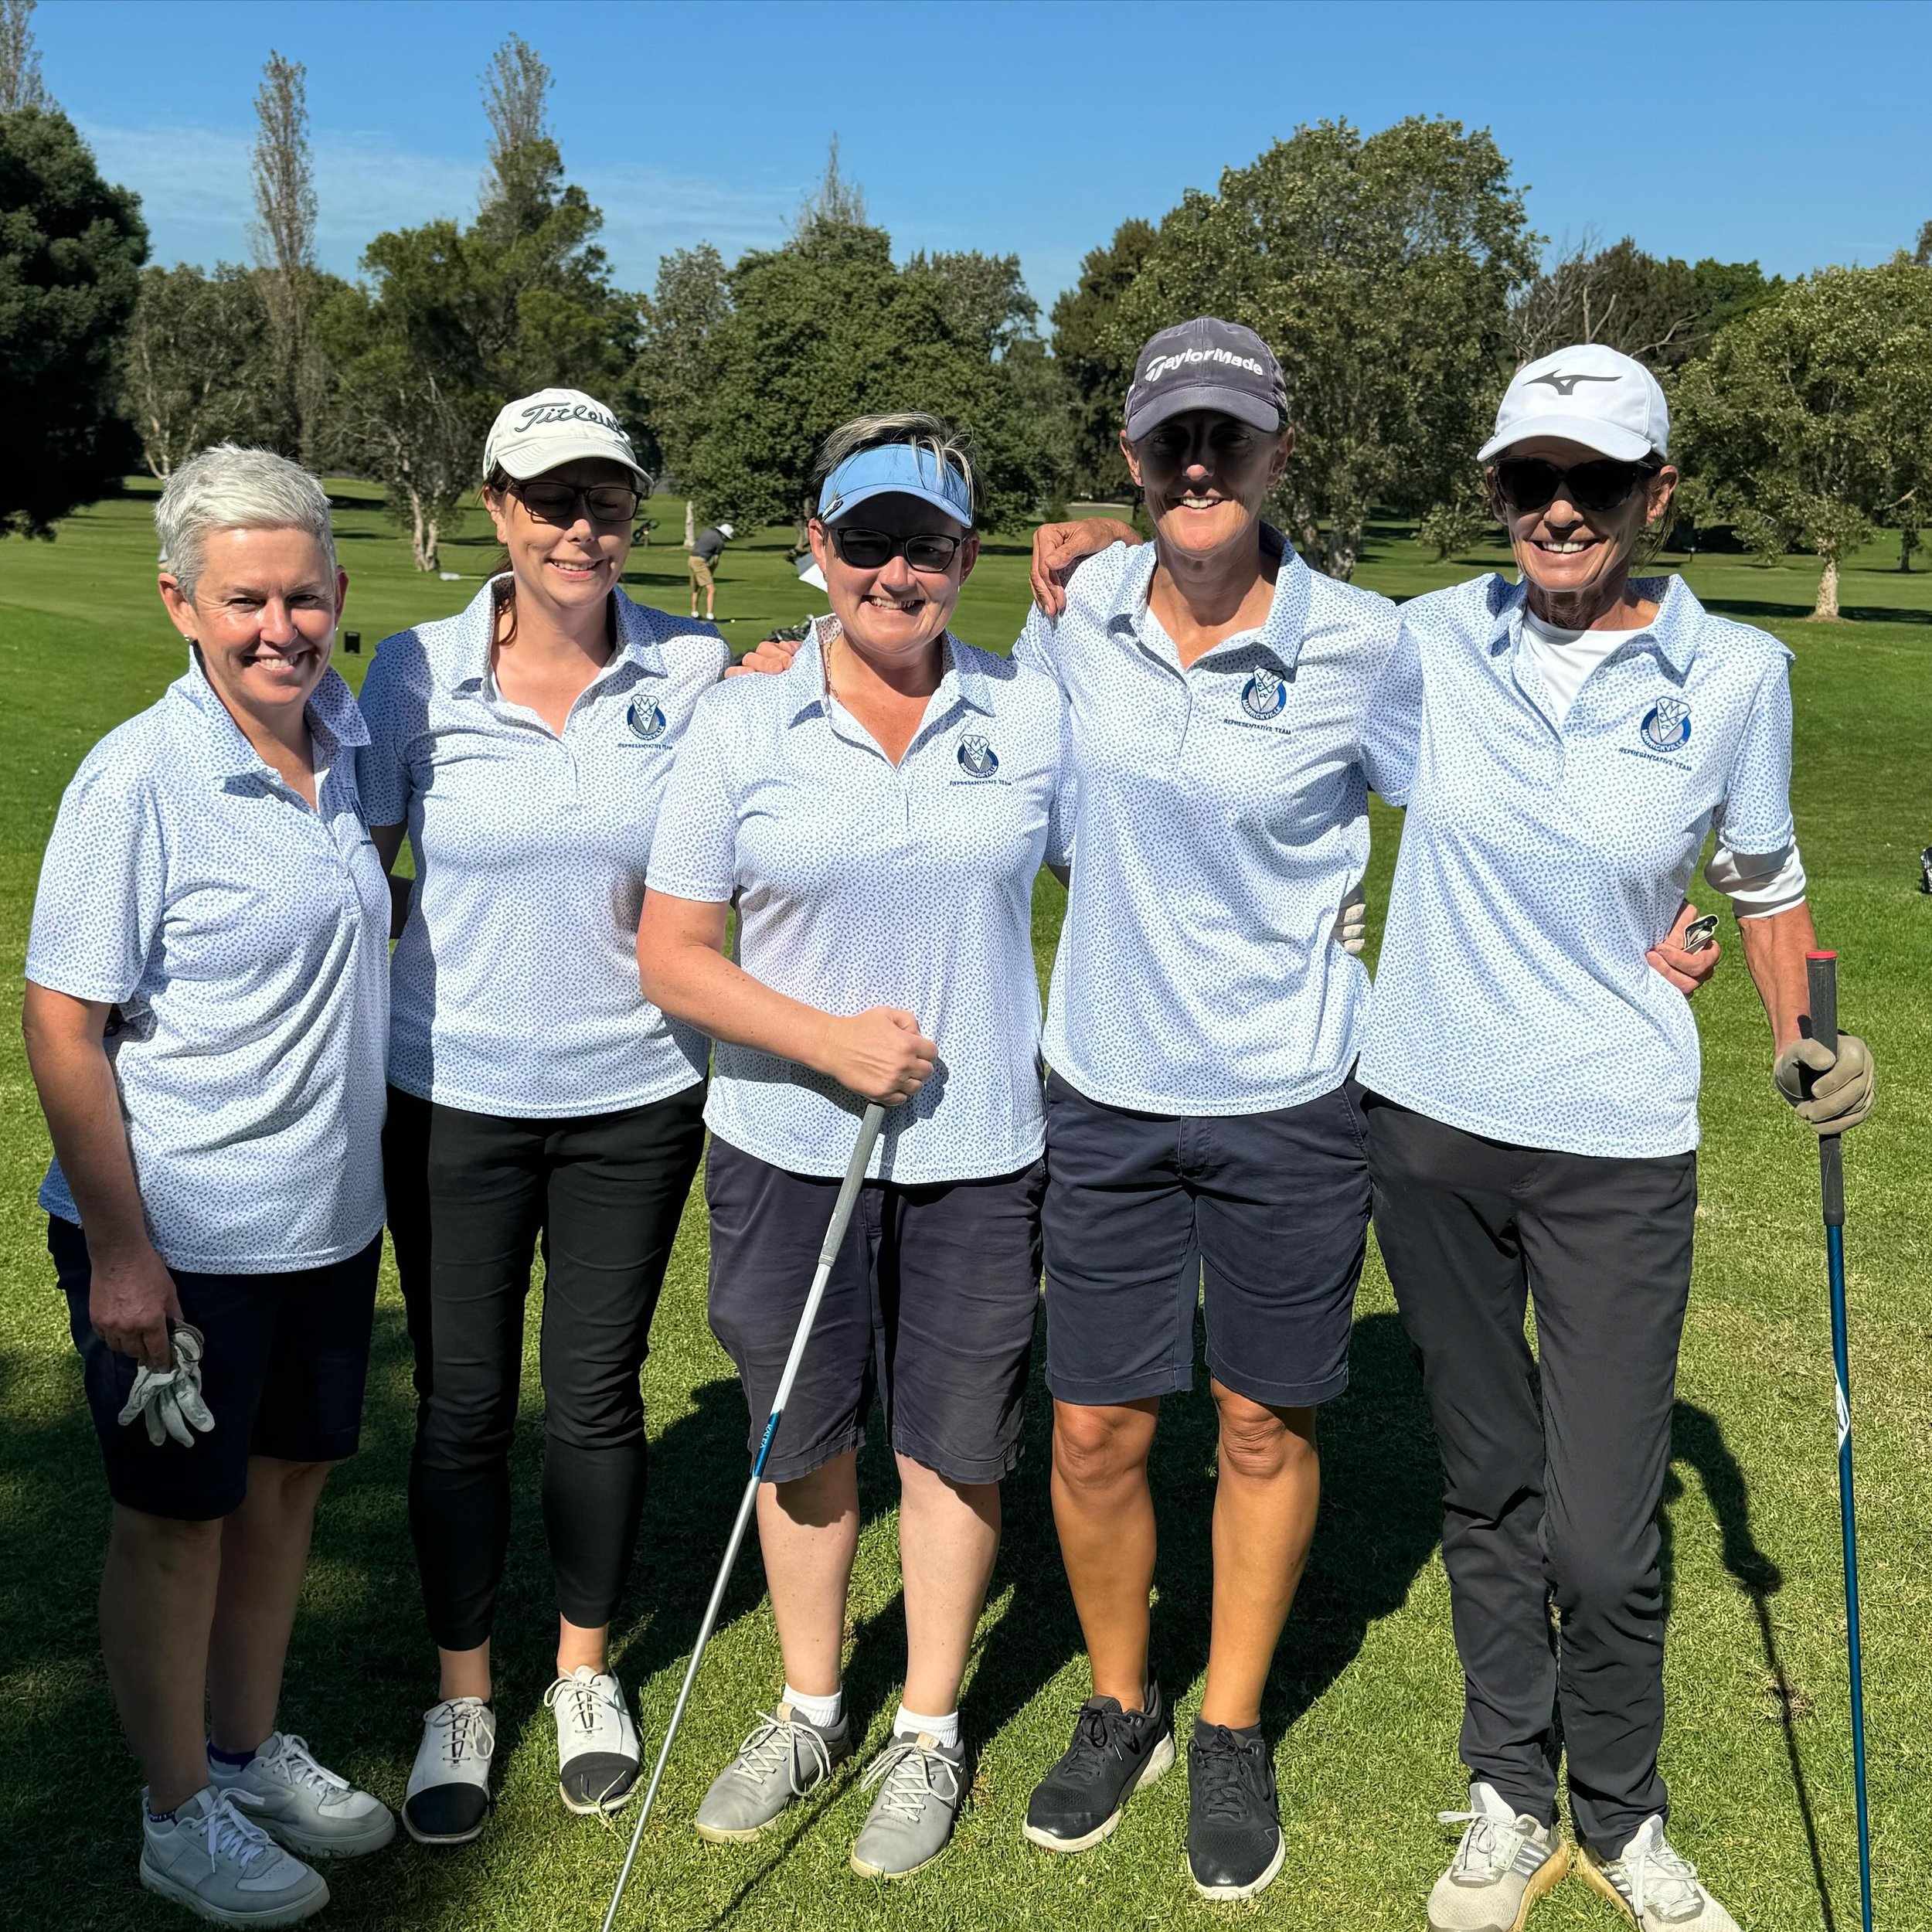 Congratulations to the MGC Sunday pennant team. A 3/2 win at Massey Park
against Beverley Park.

👏🏽😊